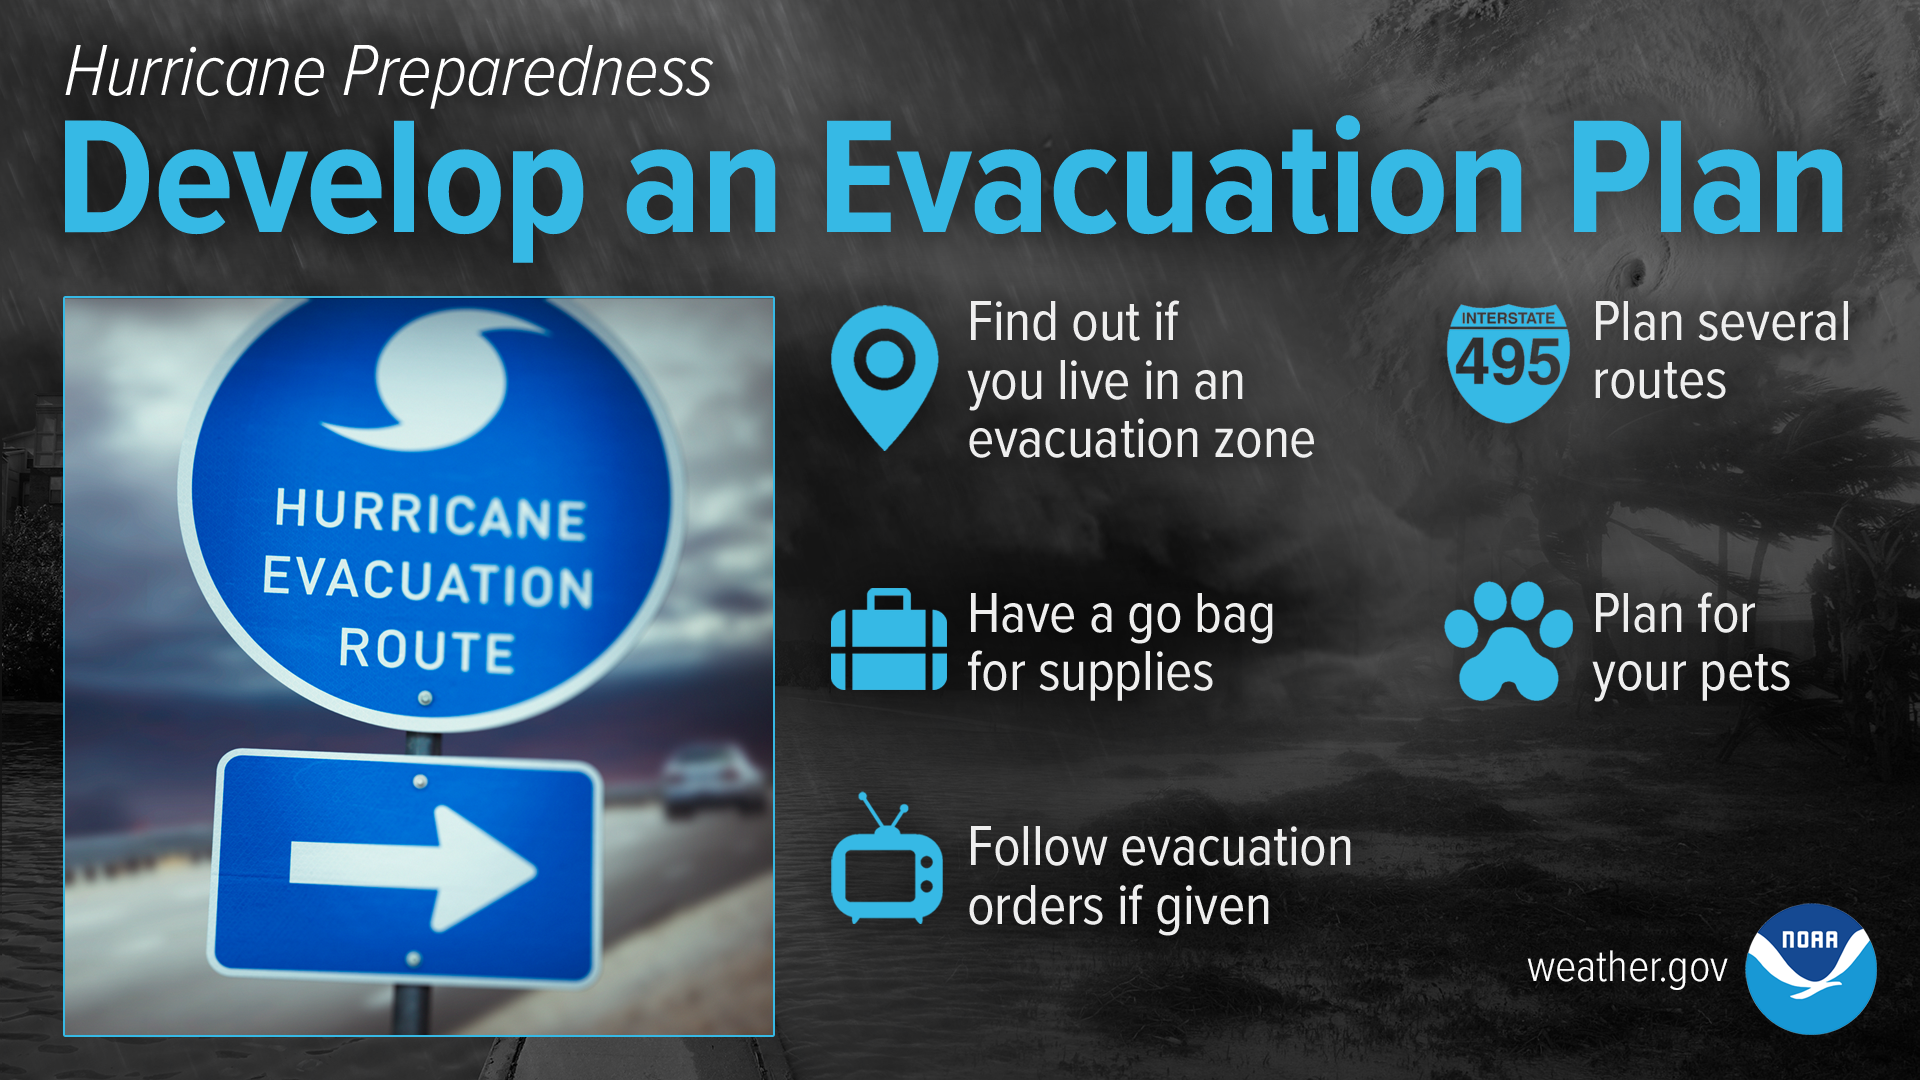 Develop an Evacuation Plan (Hurricane Preparedness) | National Oceanic and  Atmospheric Administration